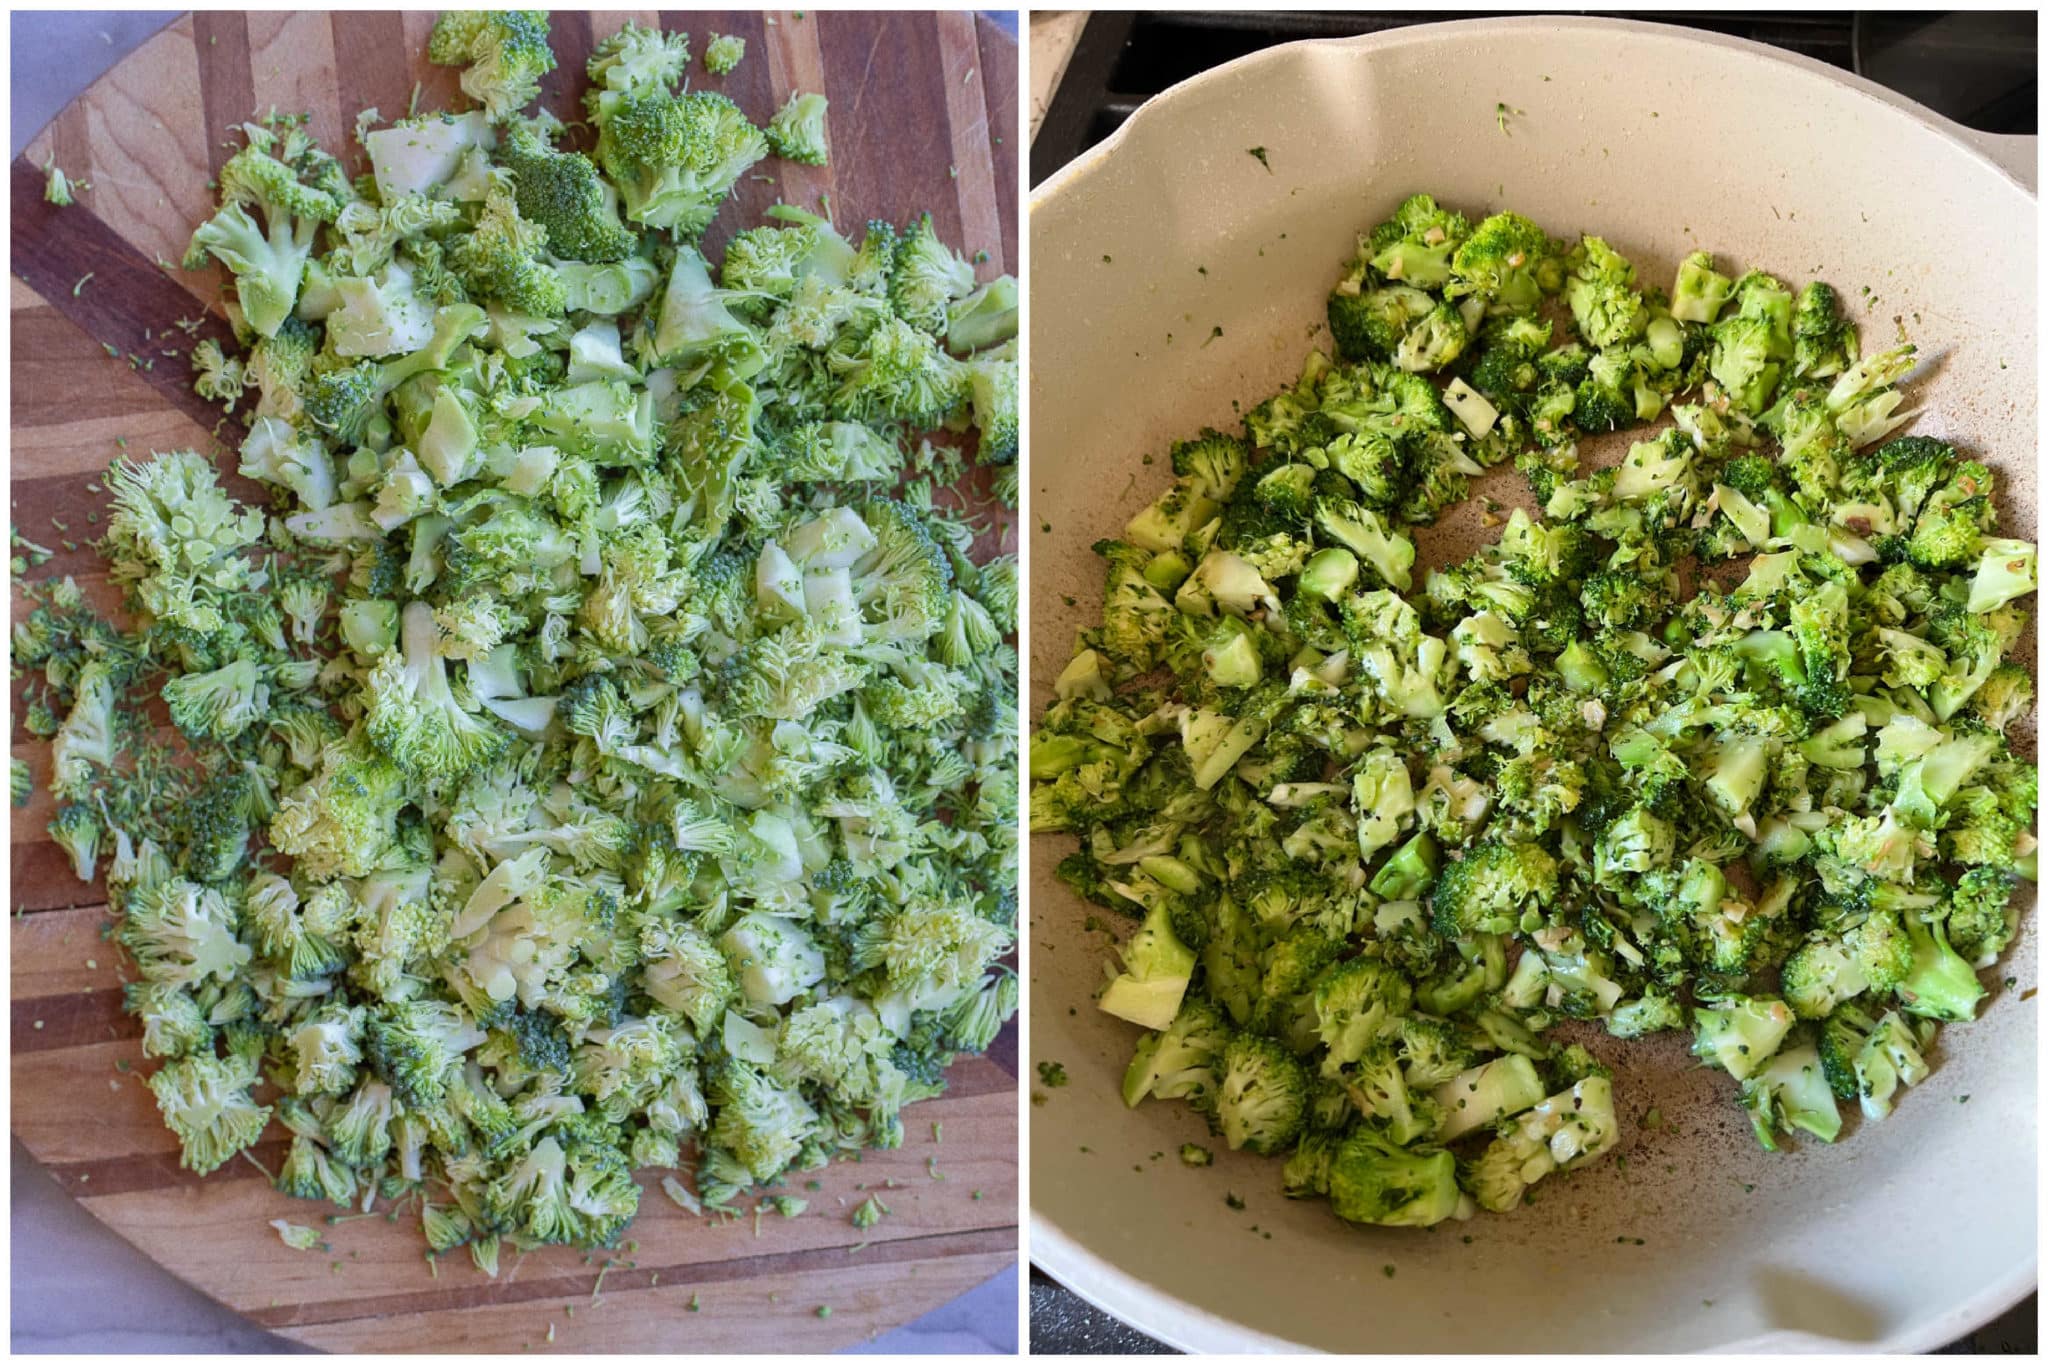 chopped broccoli before and after it has been cooked